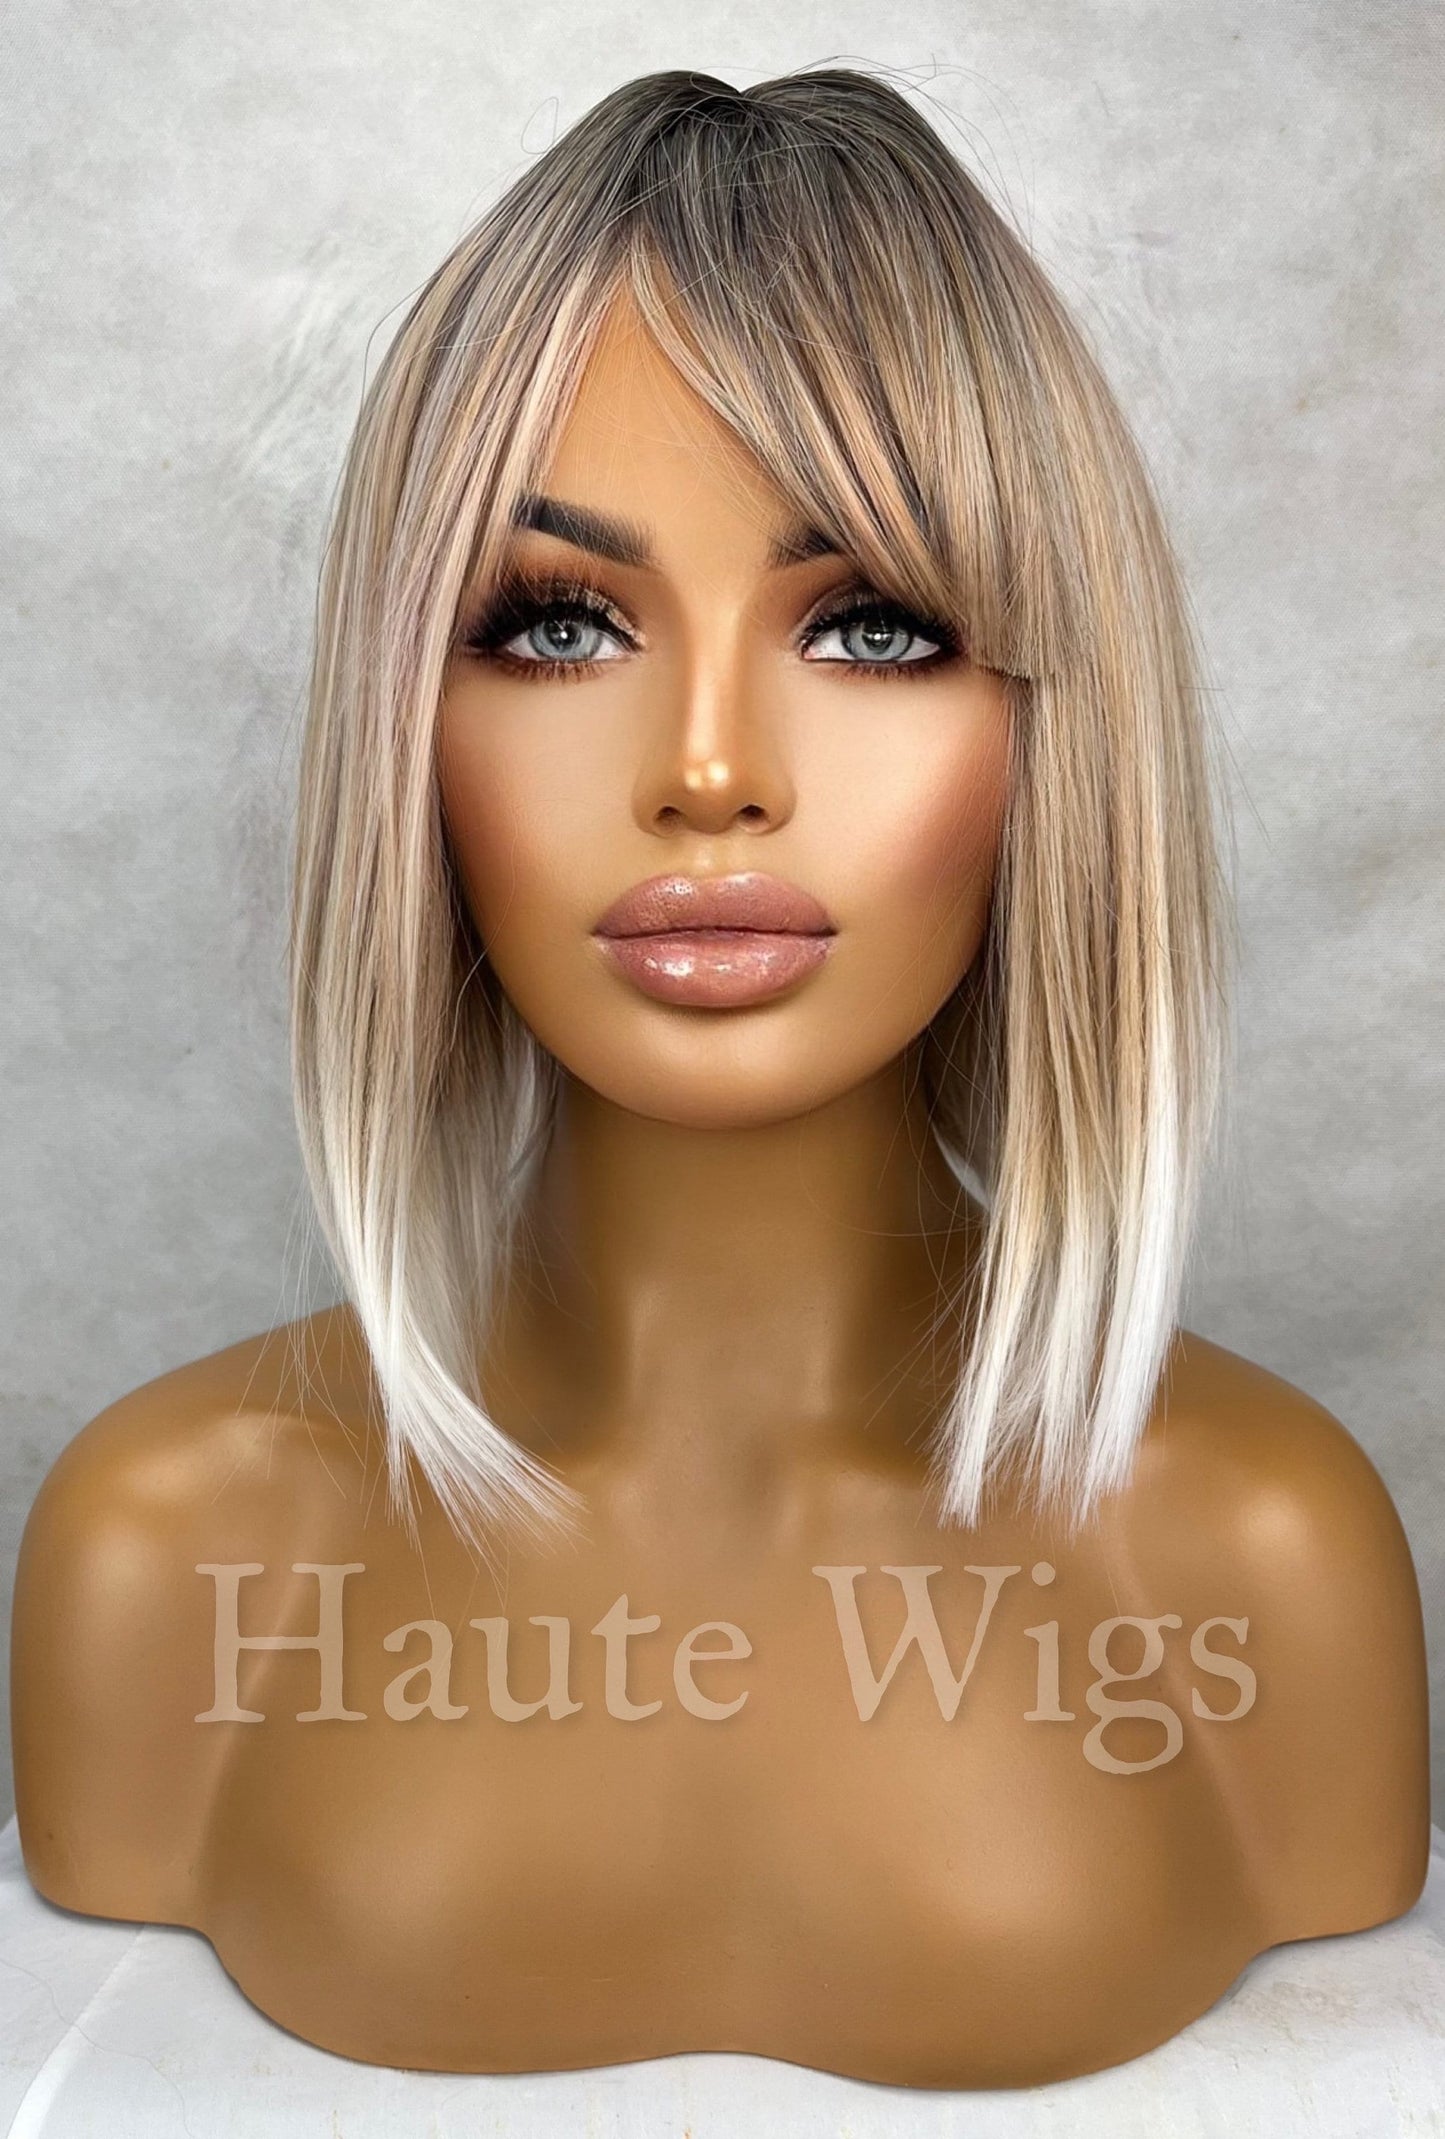 Chic - Short Ash Blonde White Ends Balayage Highlights BOB streaks 12 inch Wig Straight Center Parting Low Density bangs fringe Haute wigs